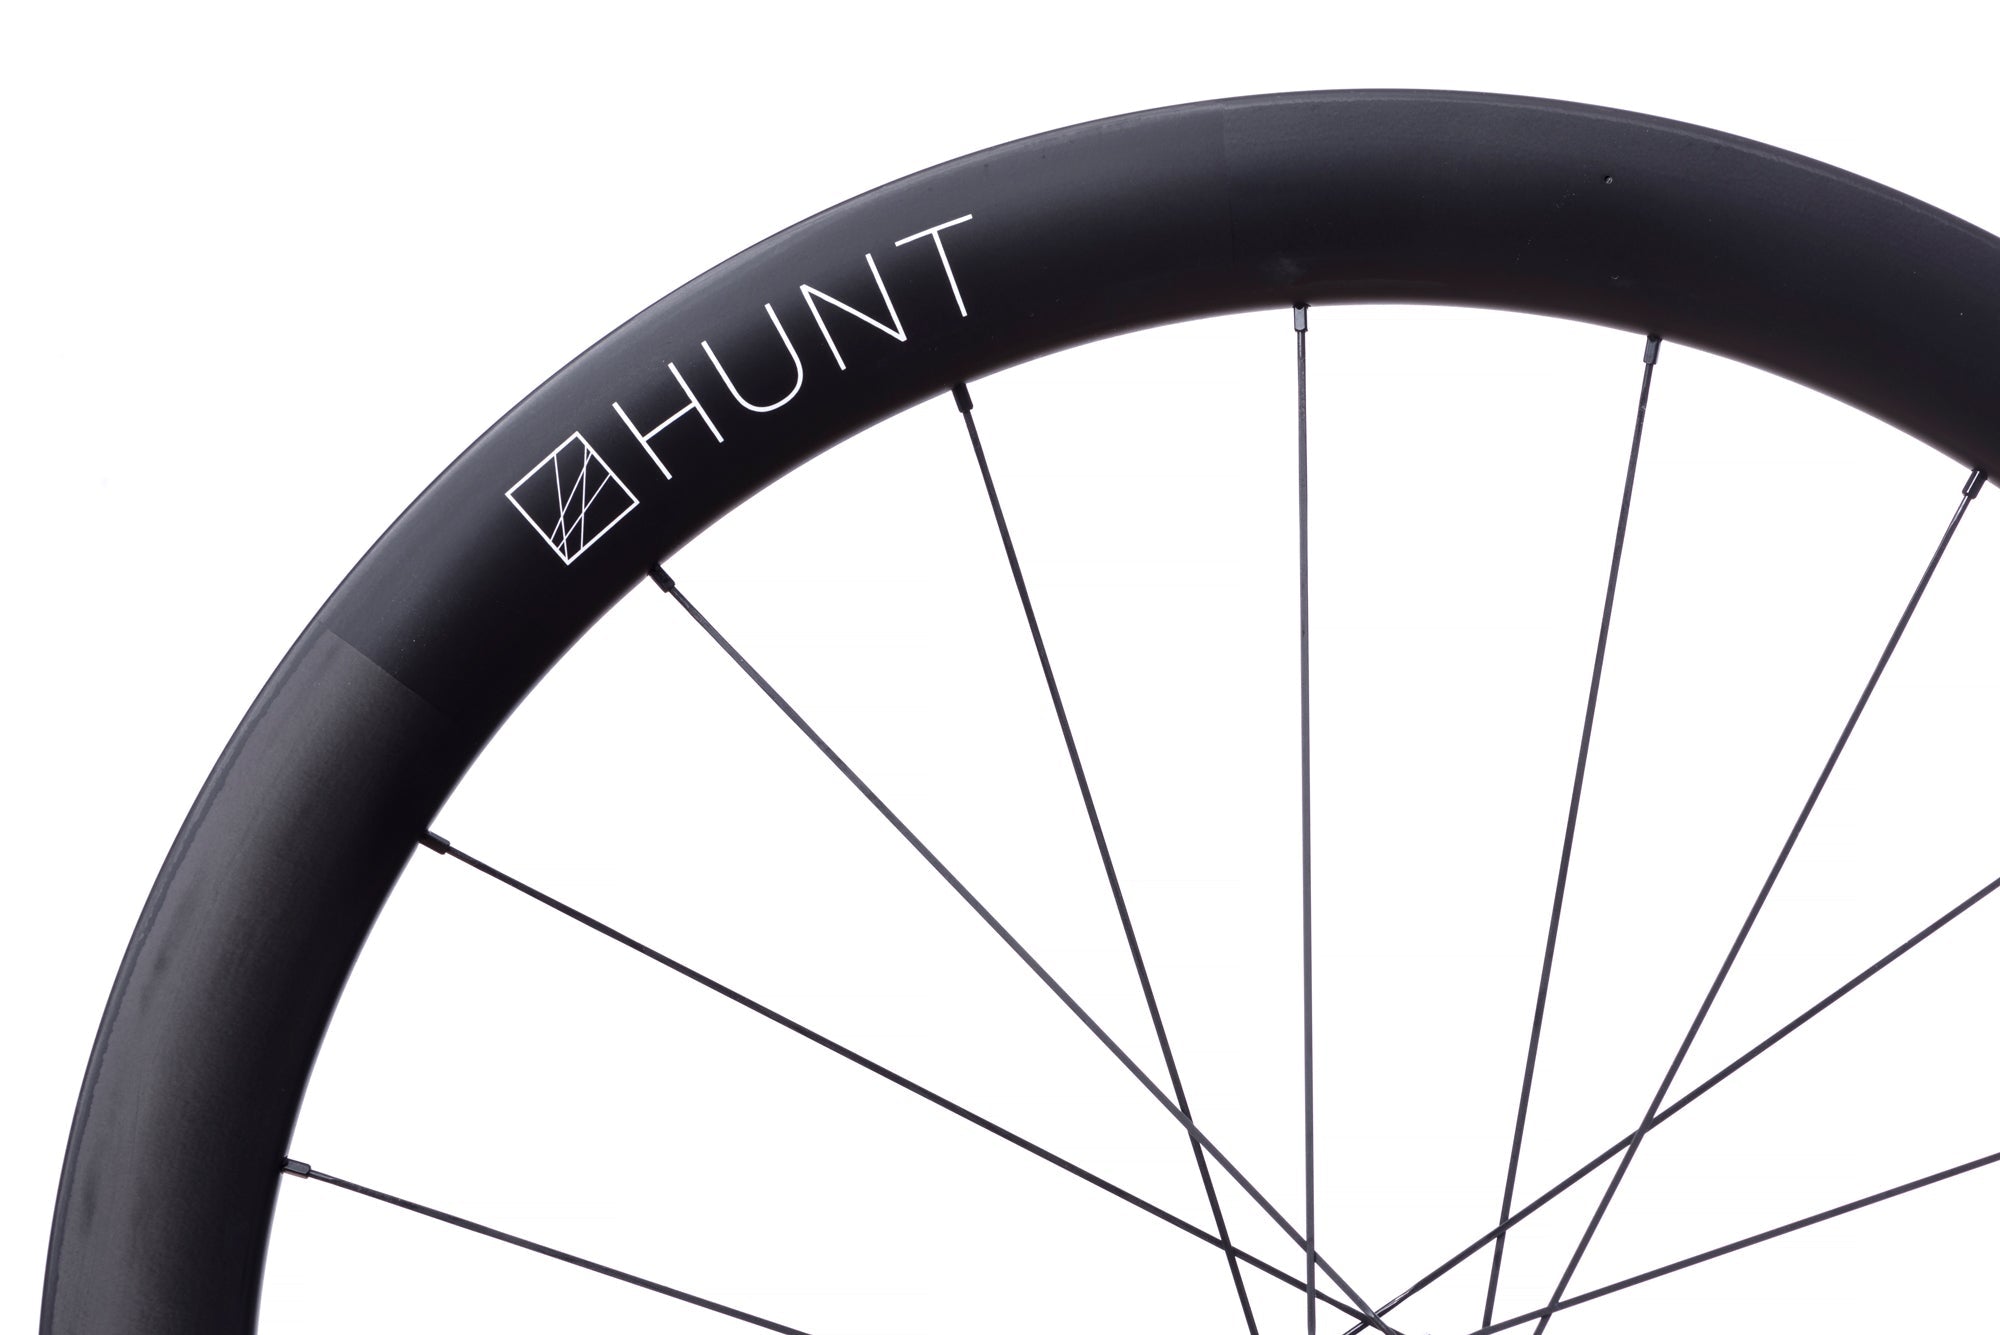 <h1>Spokes</h1><i>Pillar Spoke Re-enforcement PSR XTRA models. These triple-butted bladed spokes are lighter but also provide a greater degree of elasticity, to maintain tensions longer and add fatigue resistance. PSR spokes feature the 2.2 width at the spoke head, providing more material in this high stress area. The nipples come with a hex head so you can achieve precise tensioning.</i>